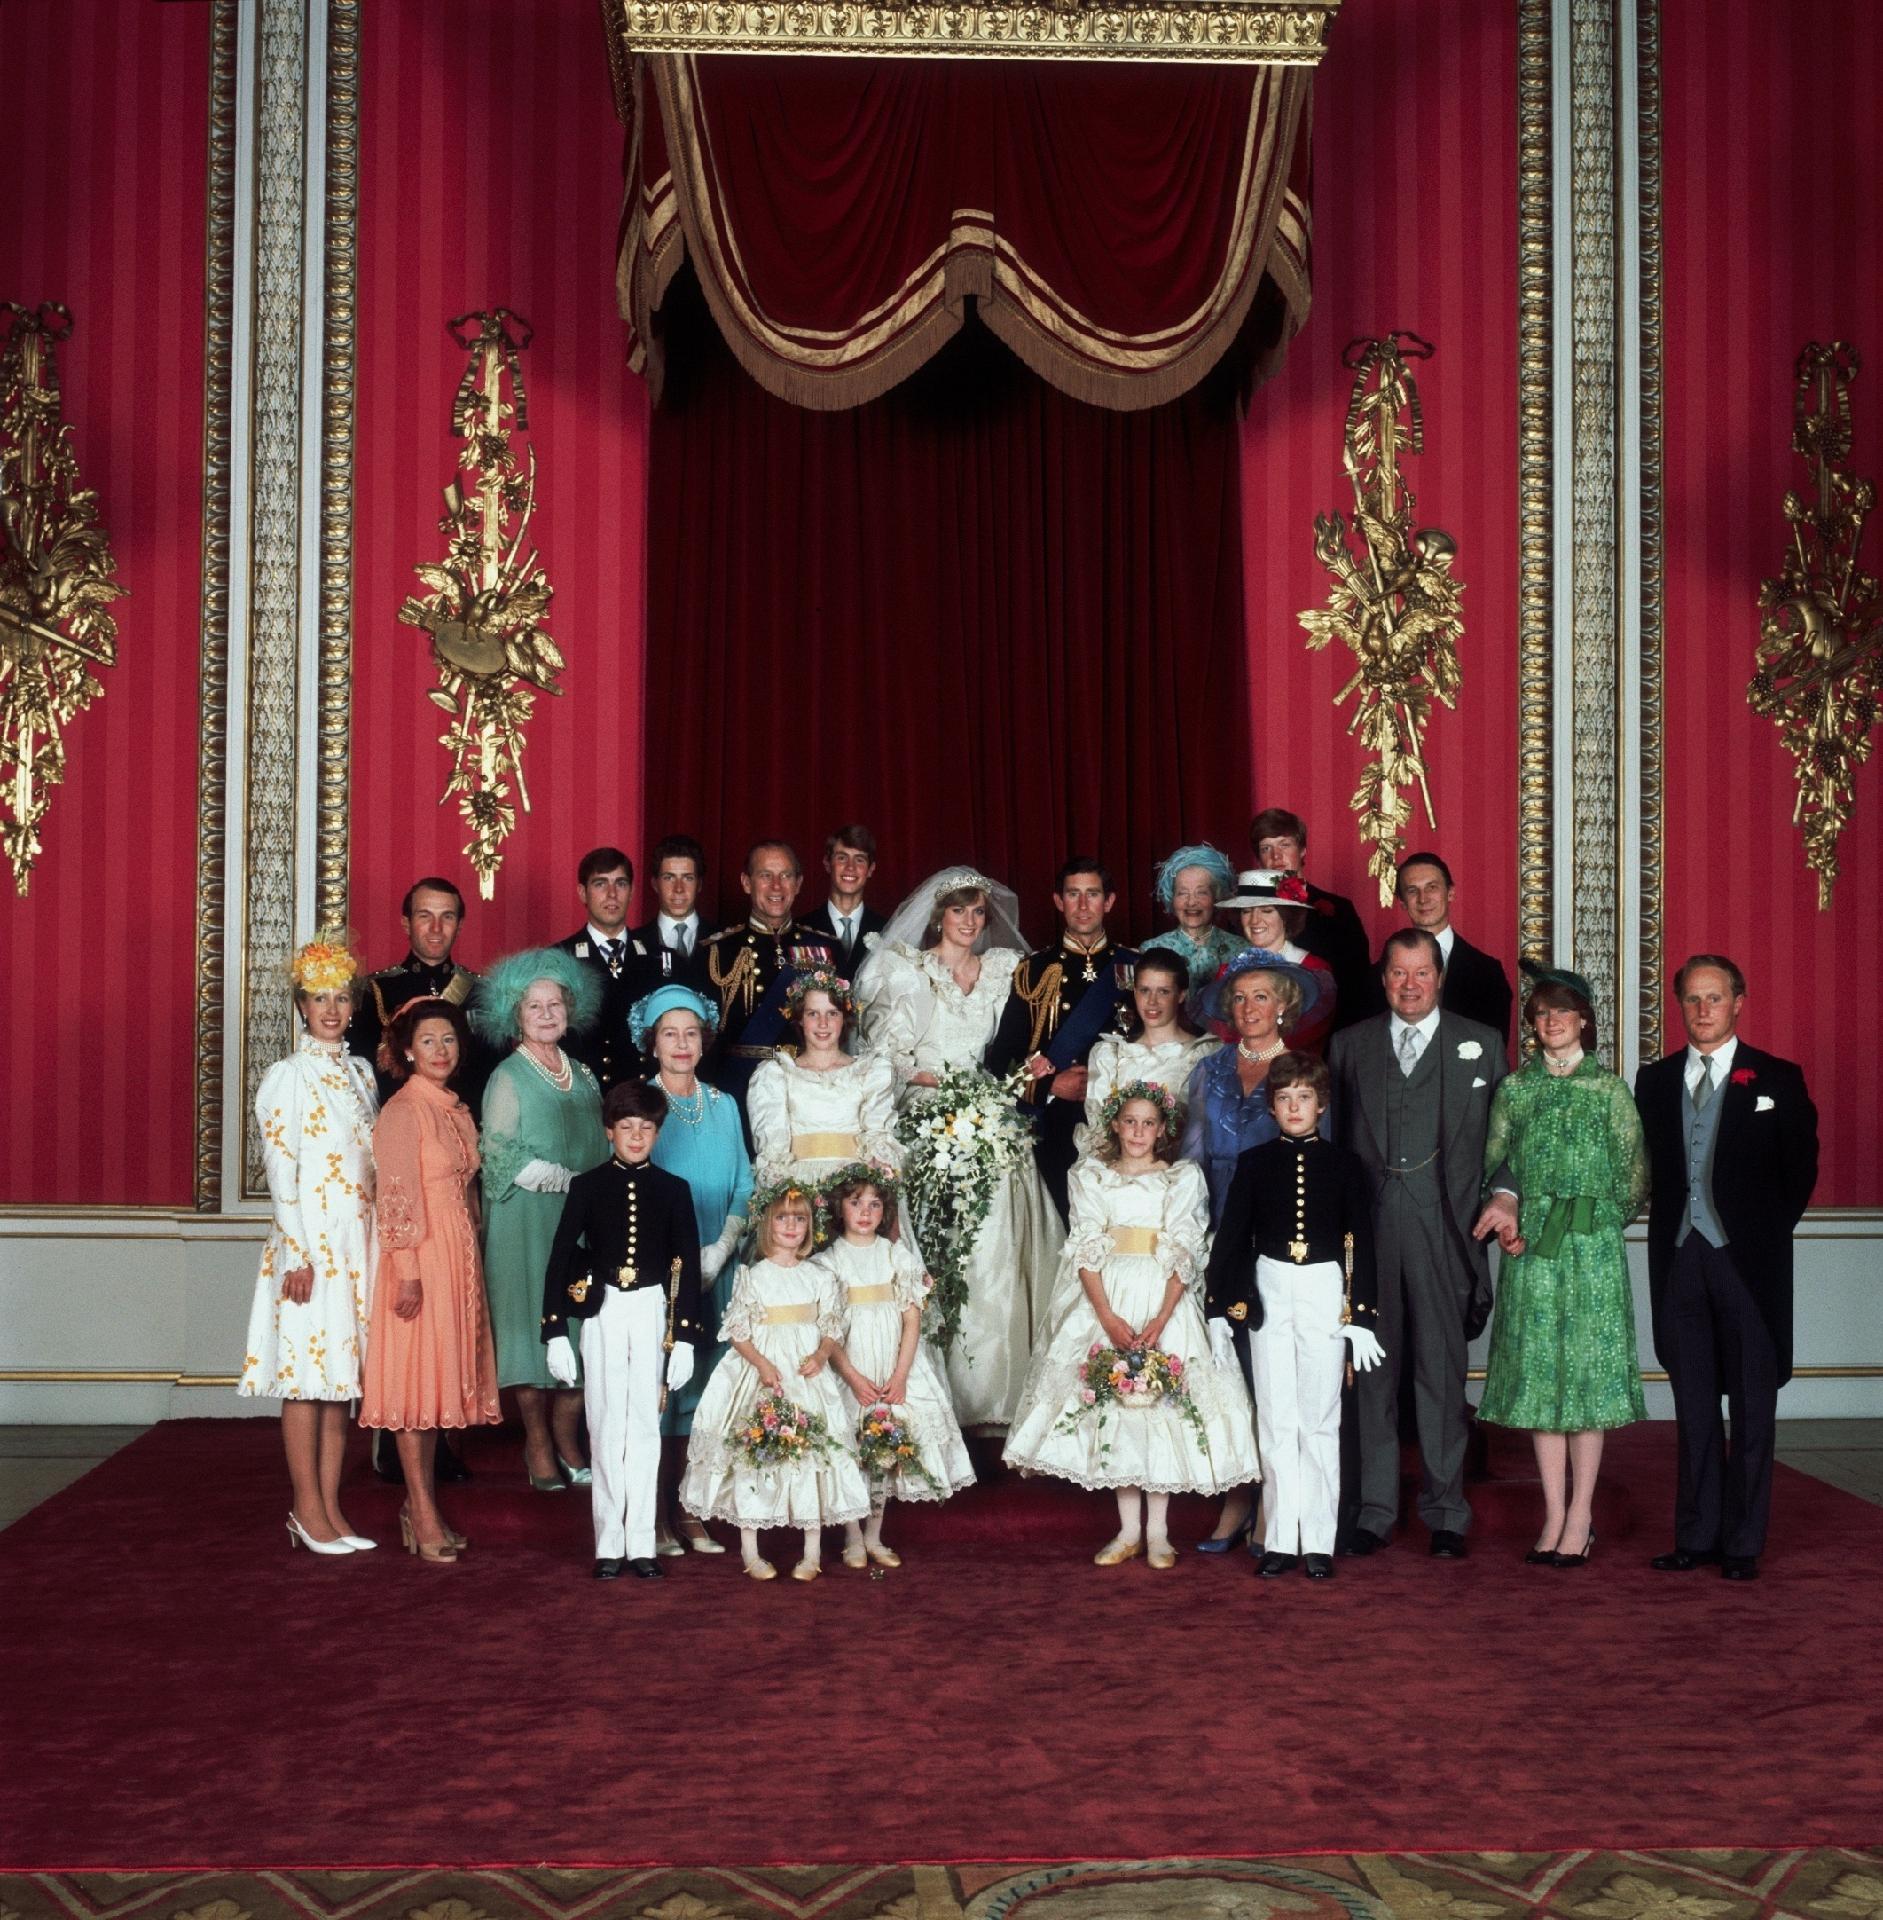 The Royal Family after Charles and Diana's wedding ceremony - Getty Images